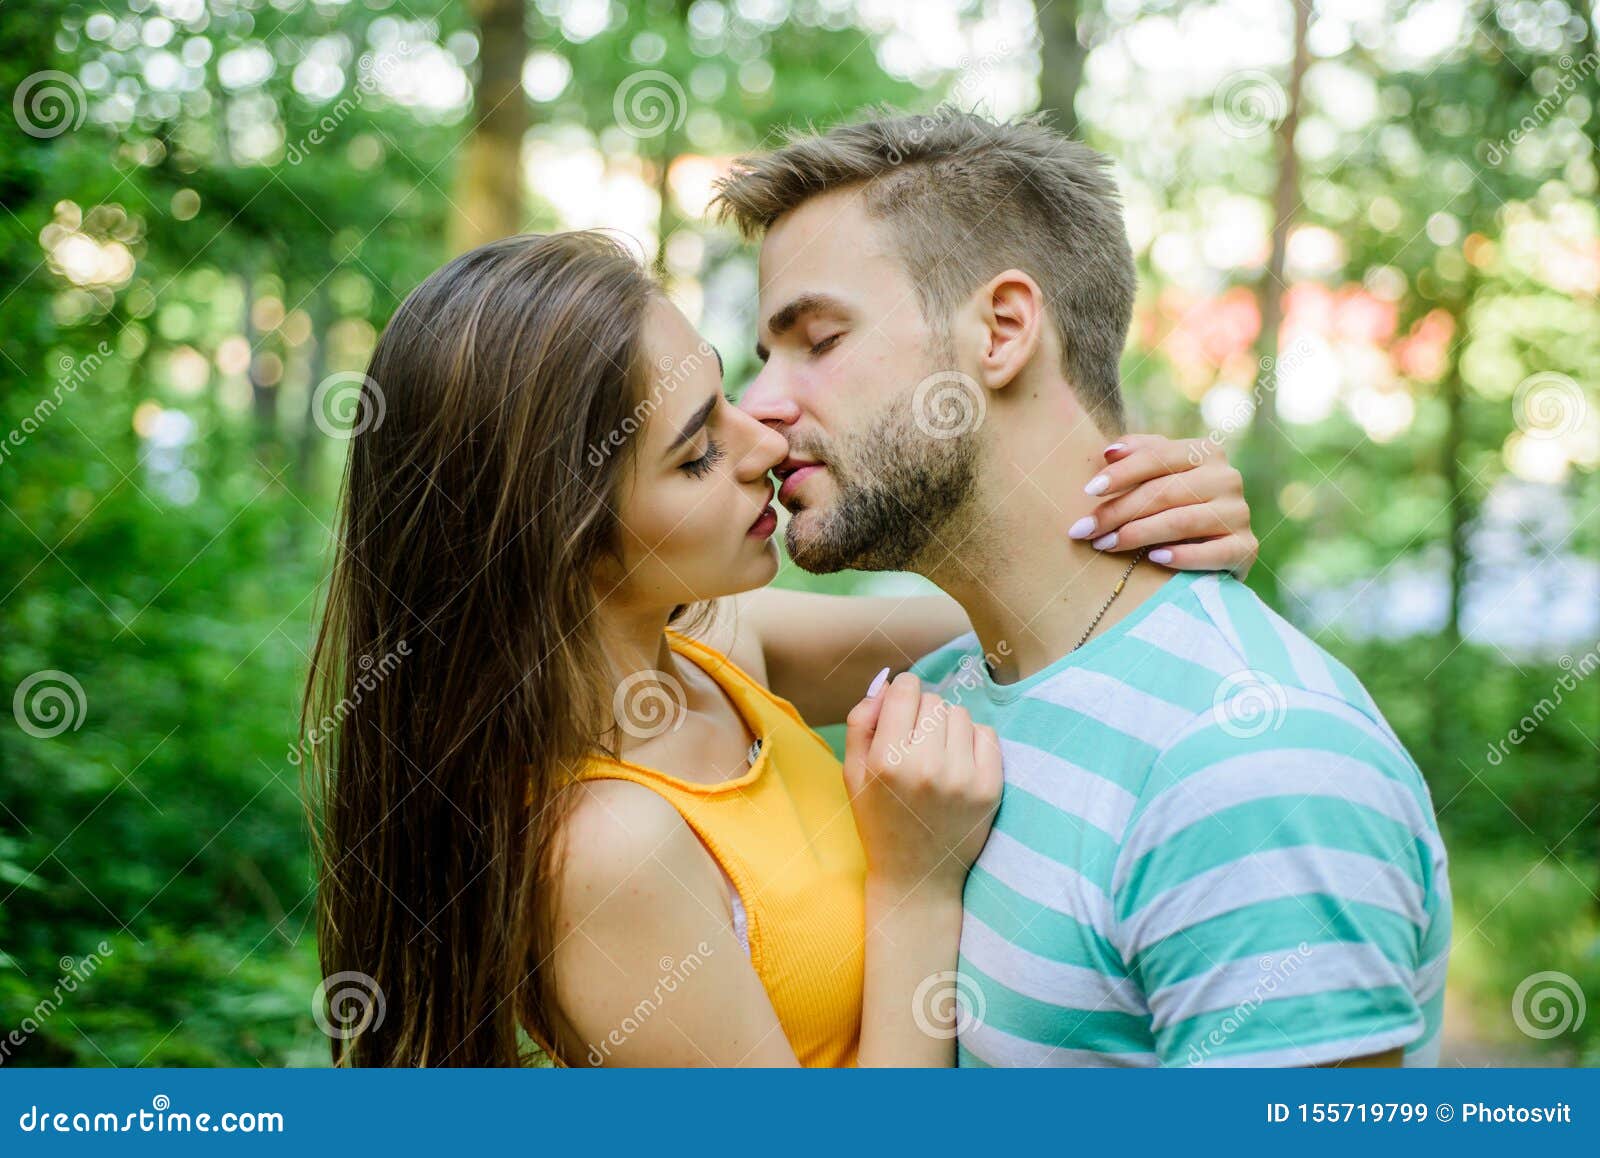 Couple in Love Kissing with Passion Outdoors. Man and Woman ...